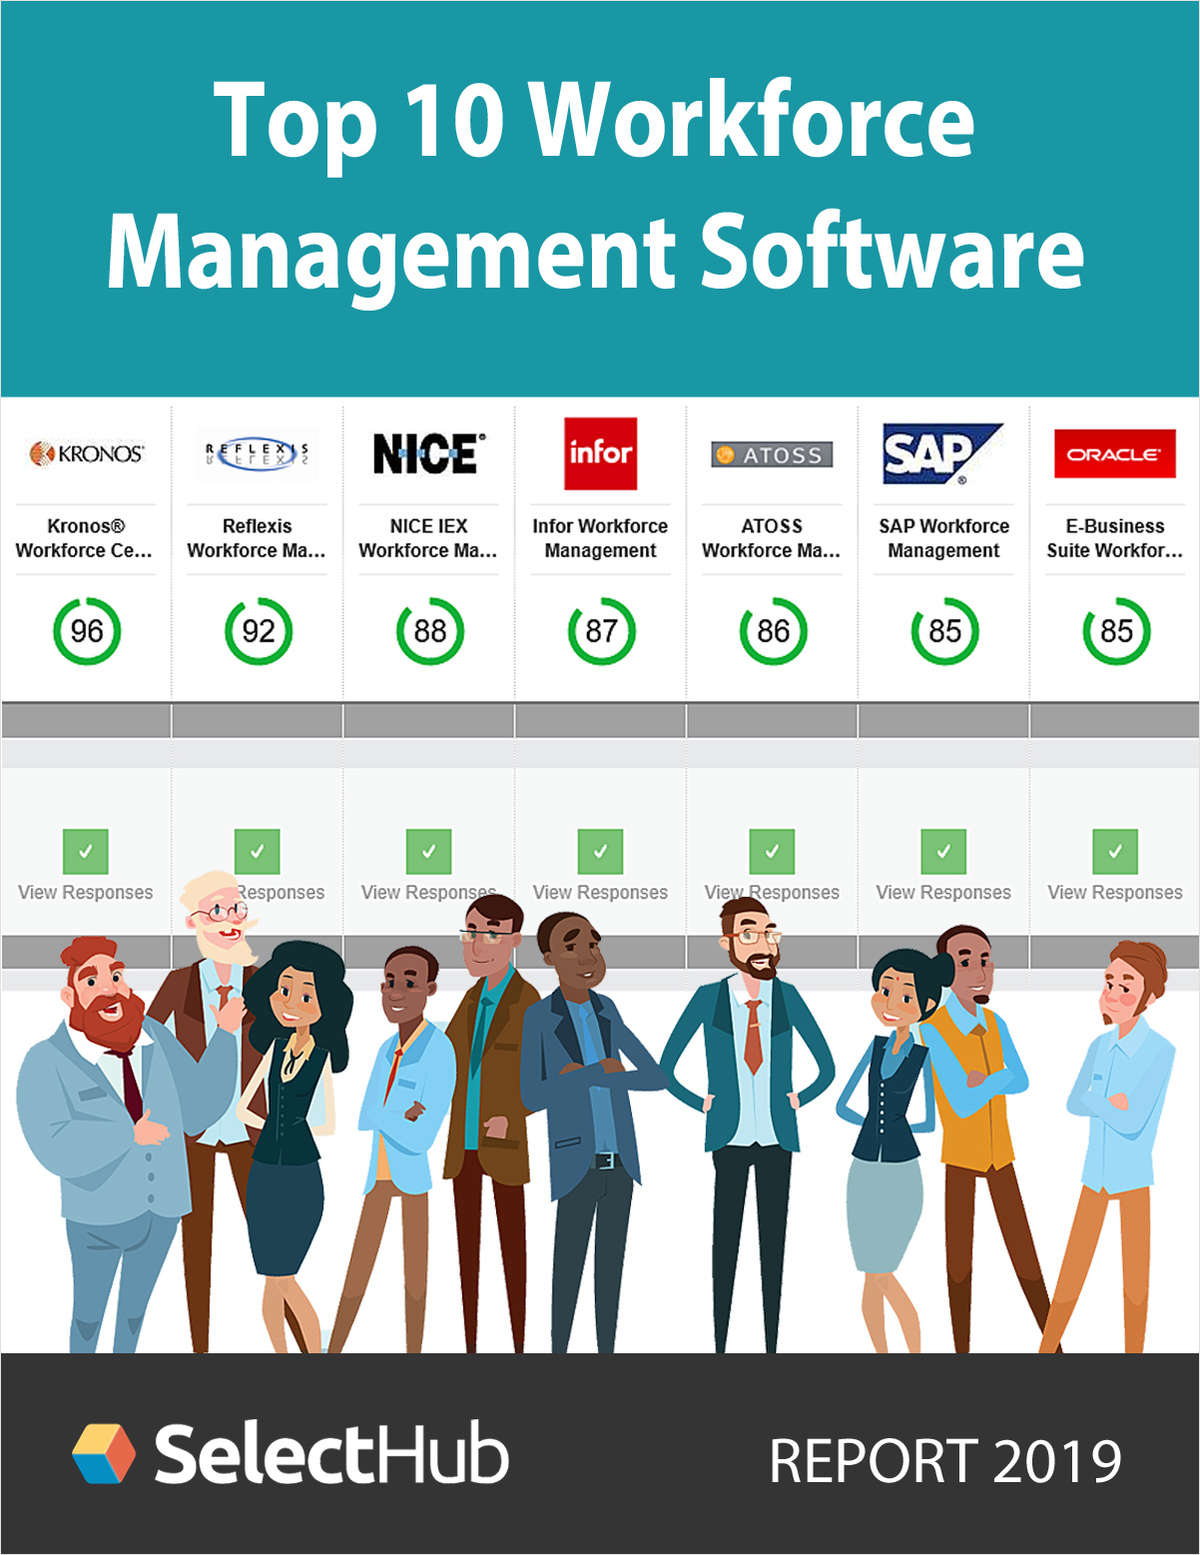 Top 10 Workforce Management Software - Get Key Features, Recommendations & Pricing